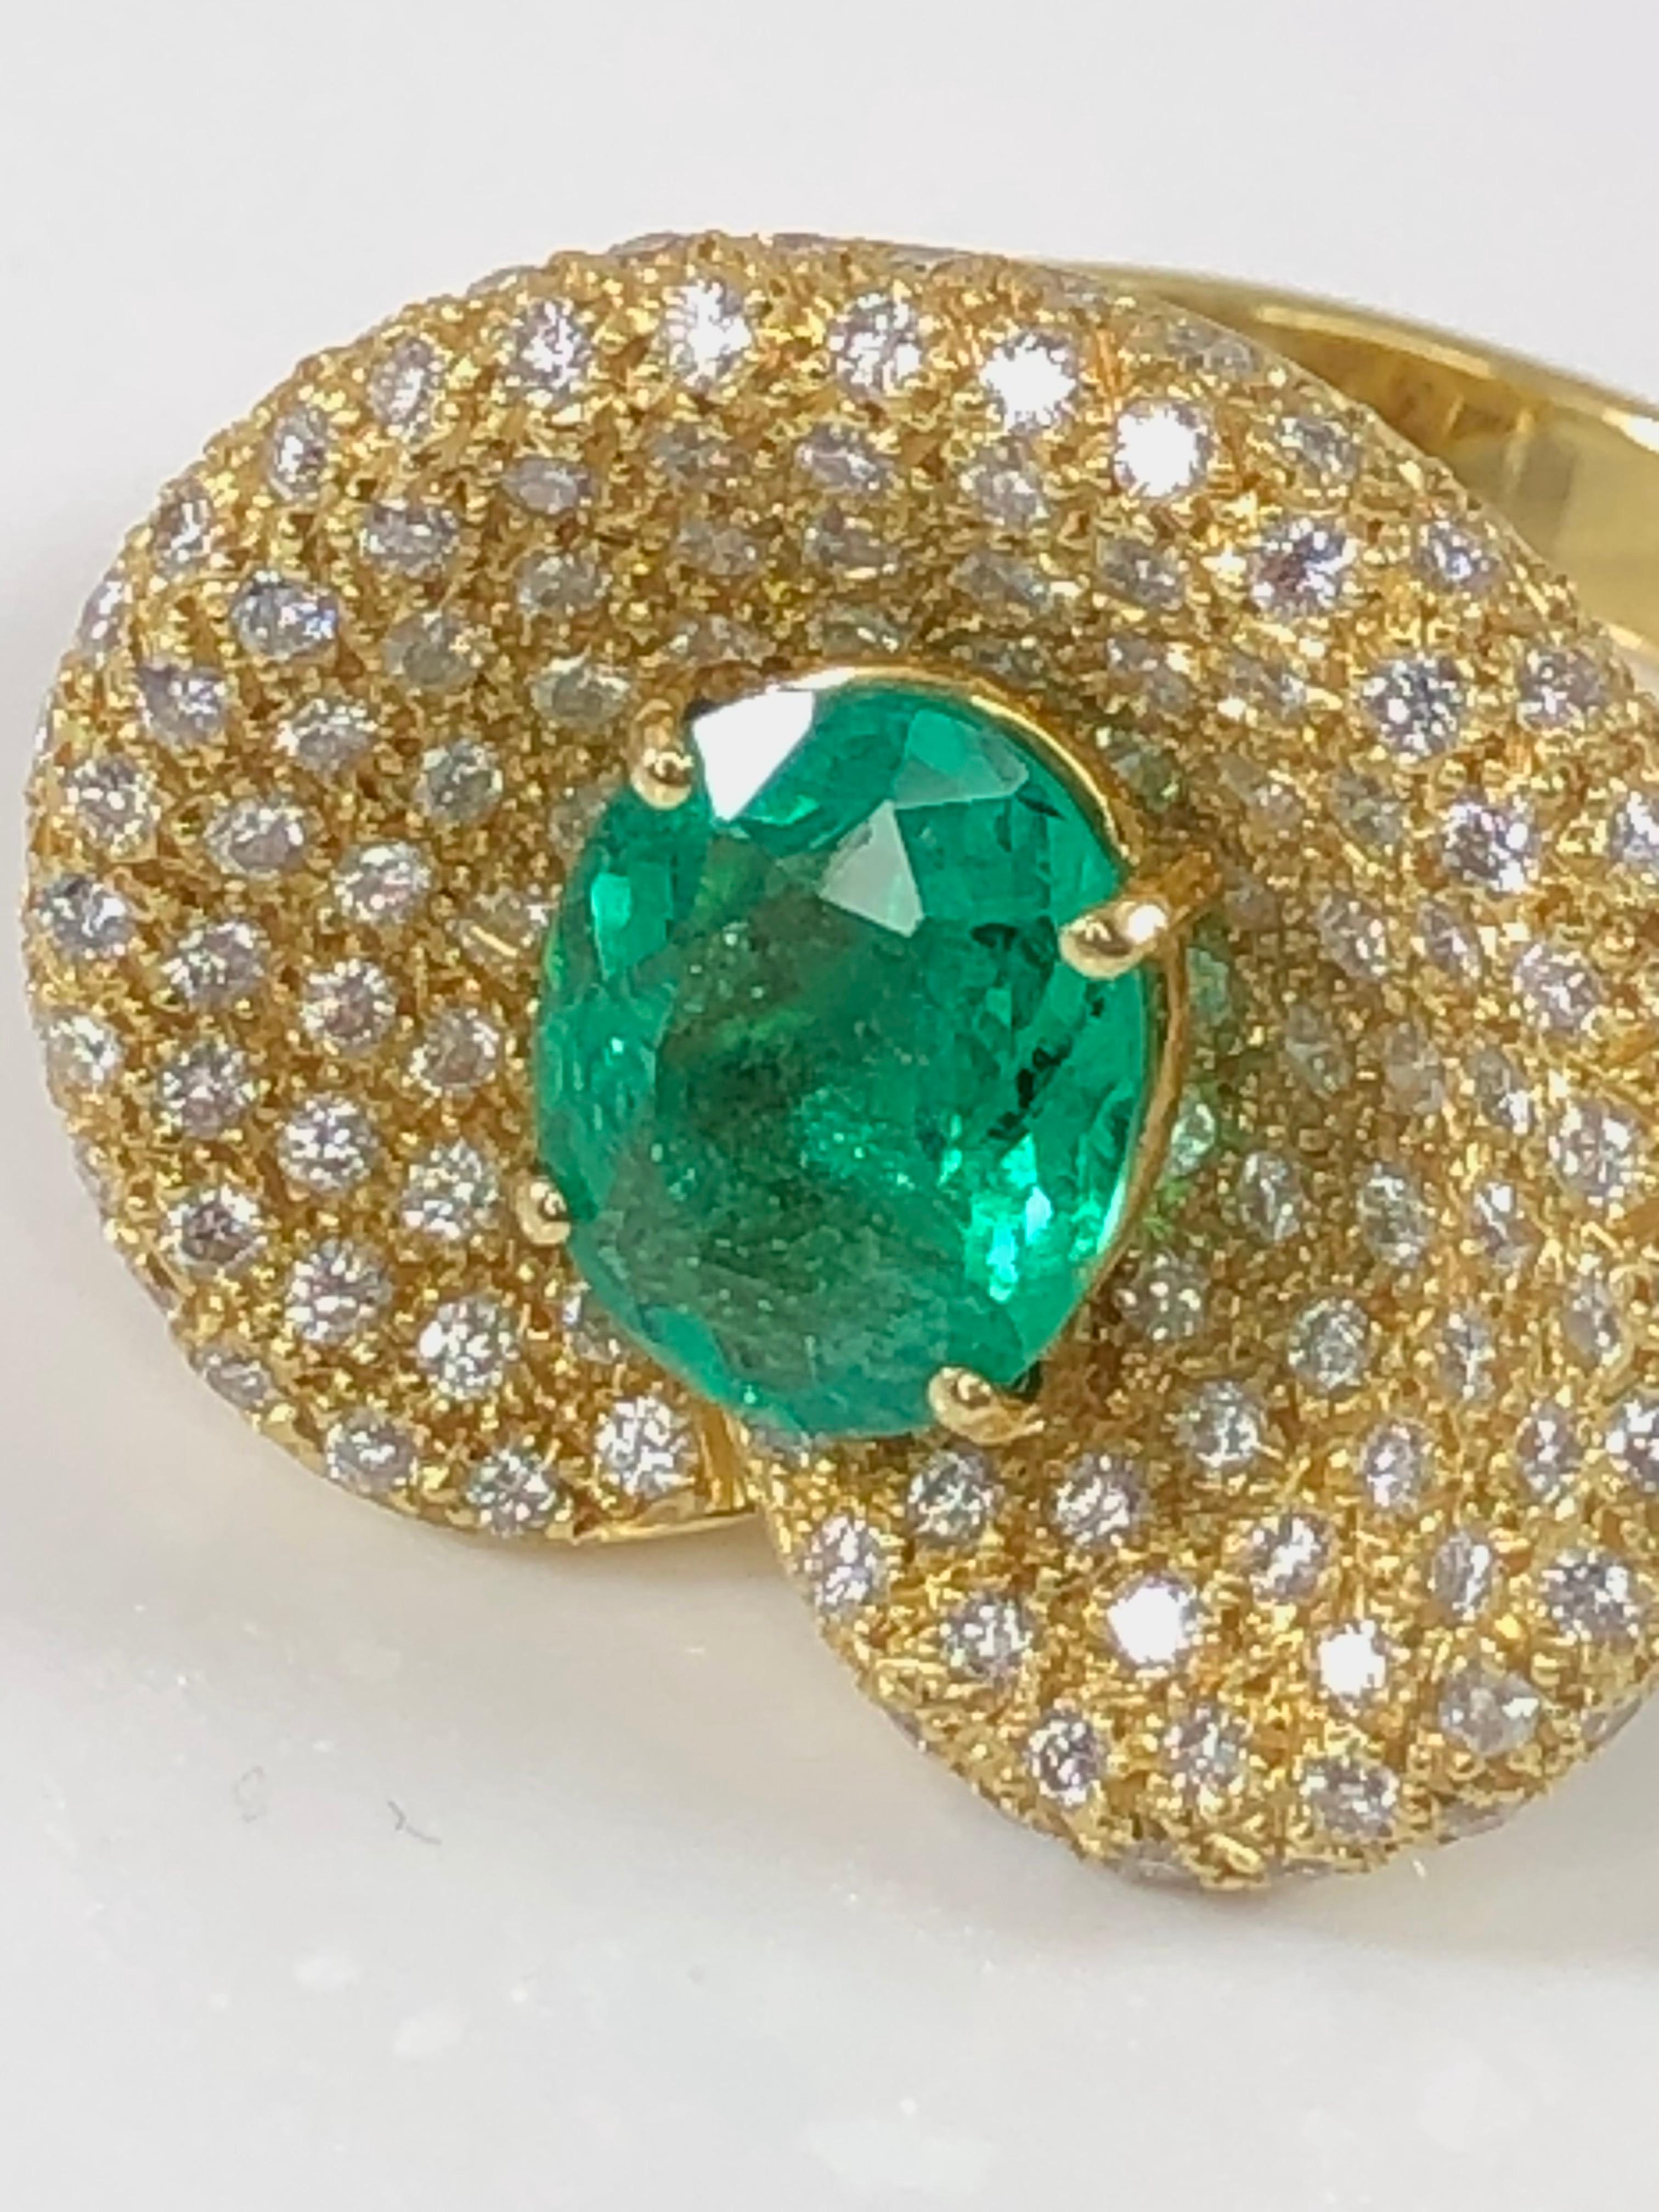 S.Georgios designer ring is all handmade in our workshop in Greece from 18 Karat Yellow Gold. The beautiful ring features a 2.44 Carat oval cut natural Emerald center and 1.68 Carat brilliant cut White Diamond microscopically set all around.
This